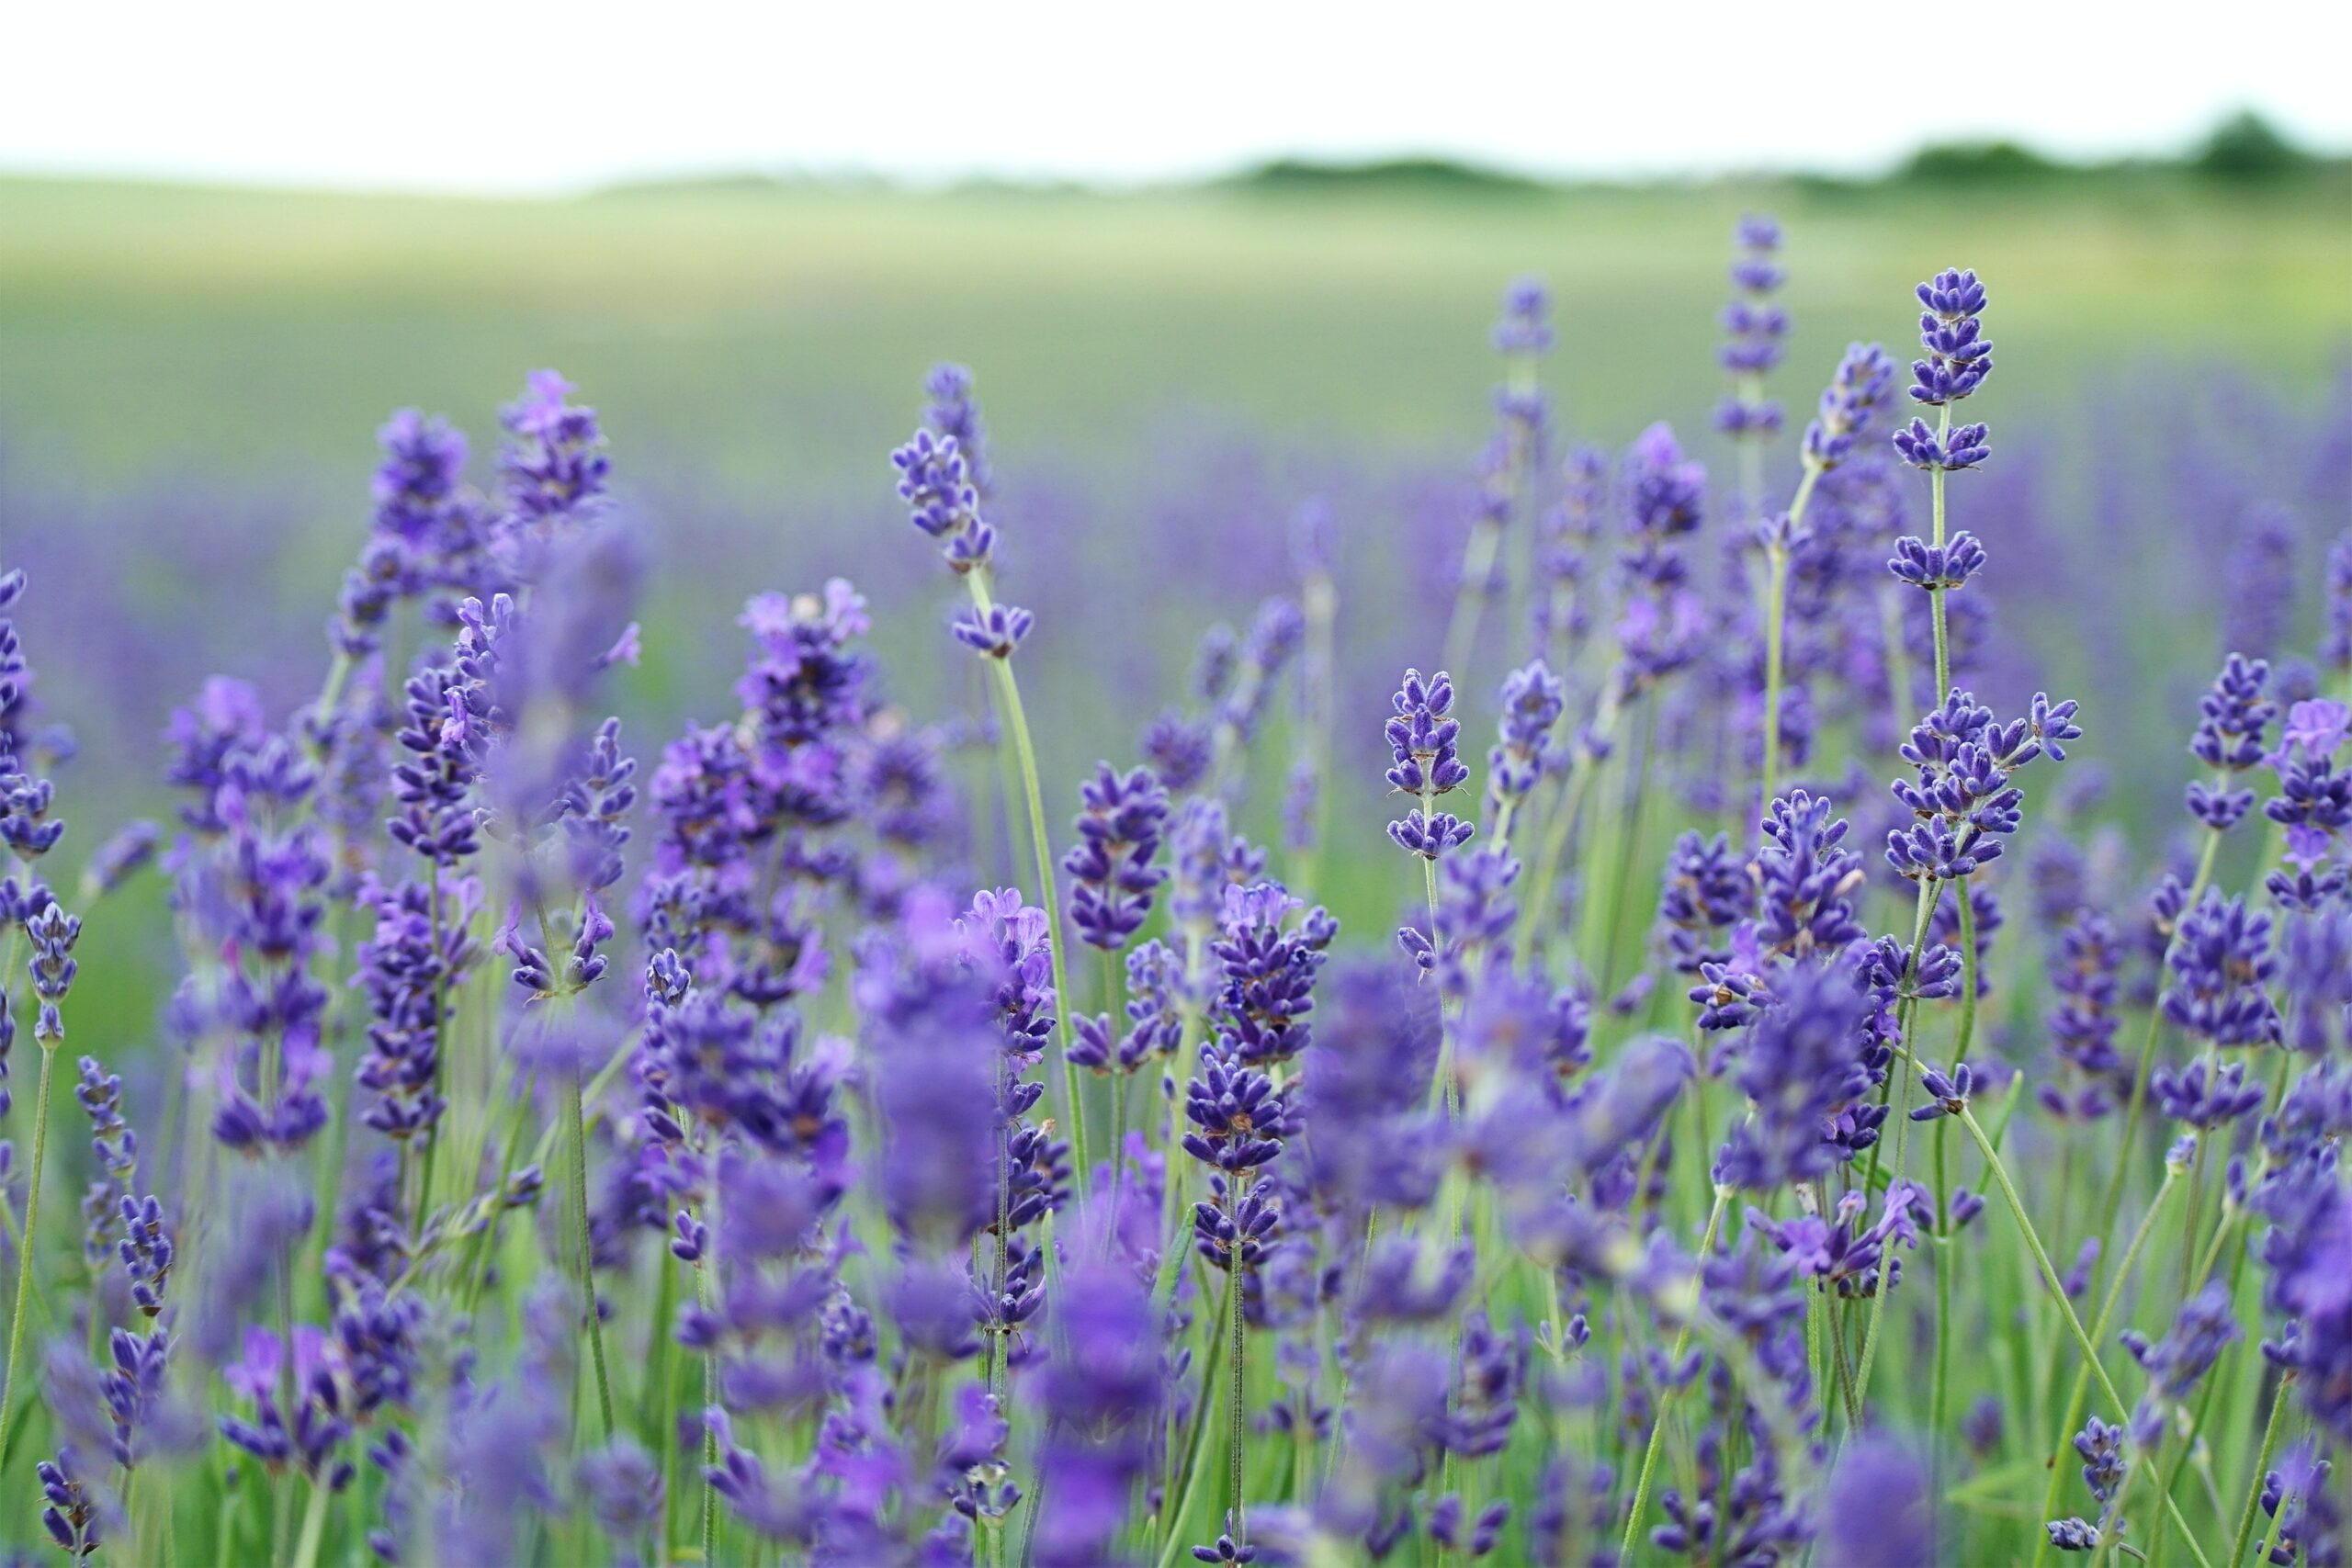 Lavender flowers are great plants that deter flies. Pictured: A field of lavender flowers.